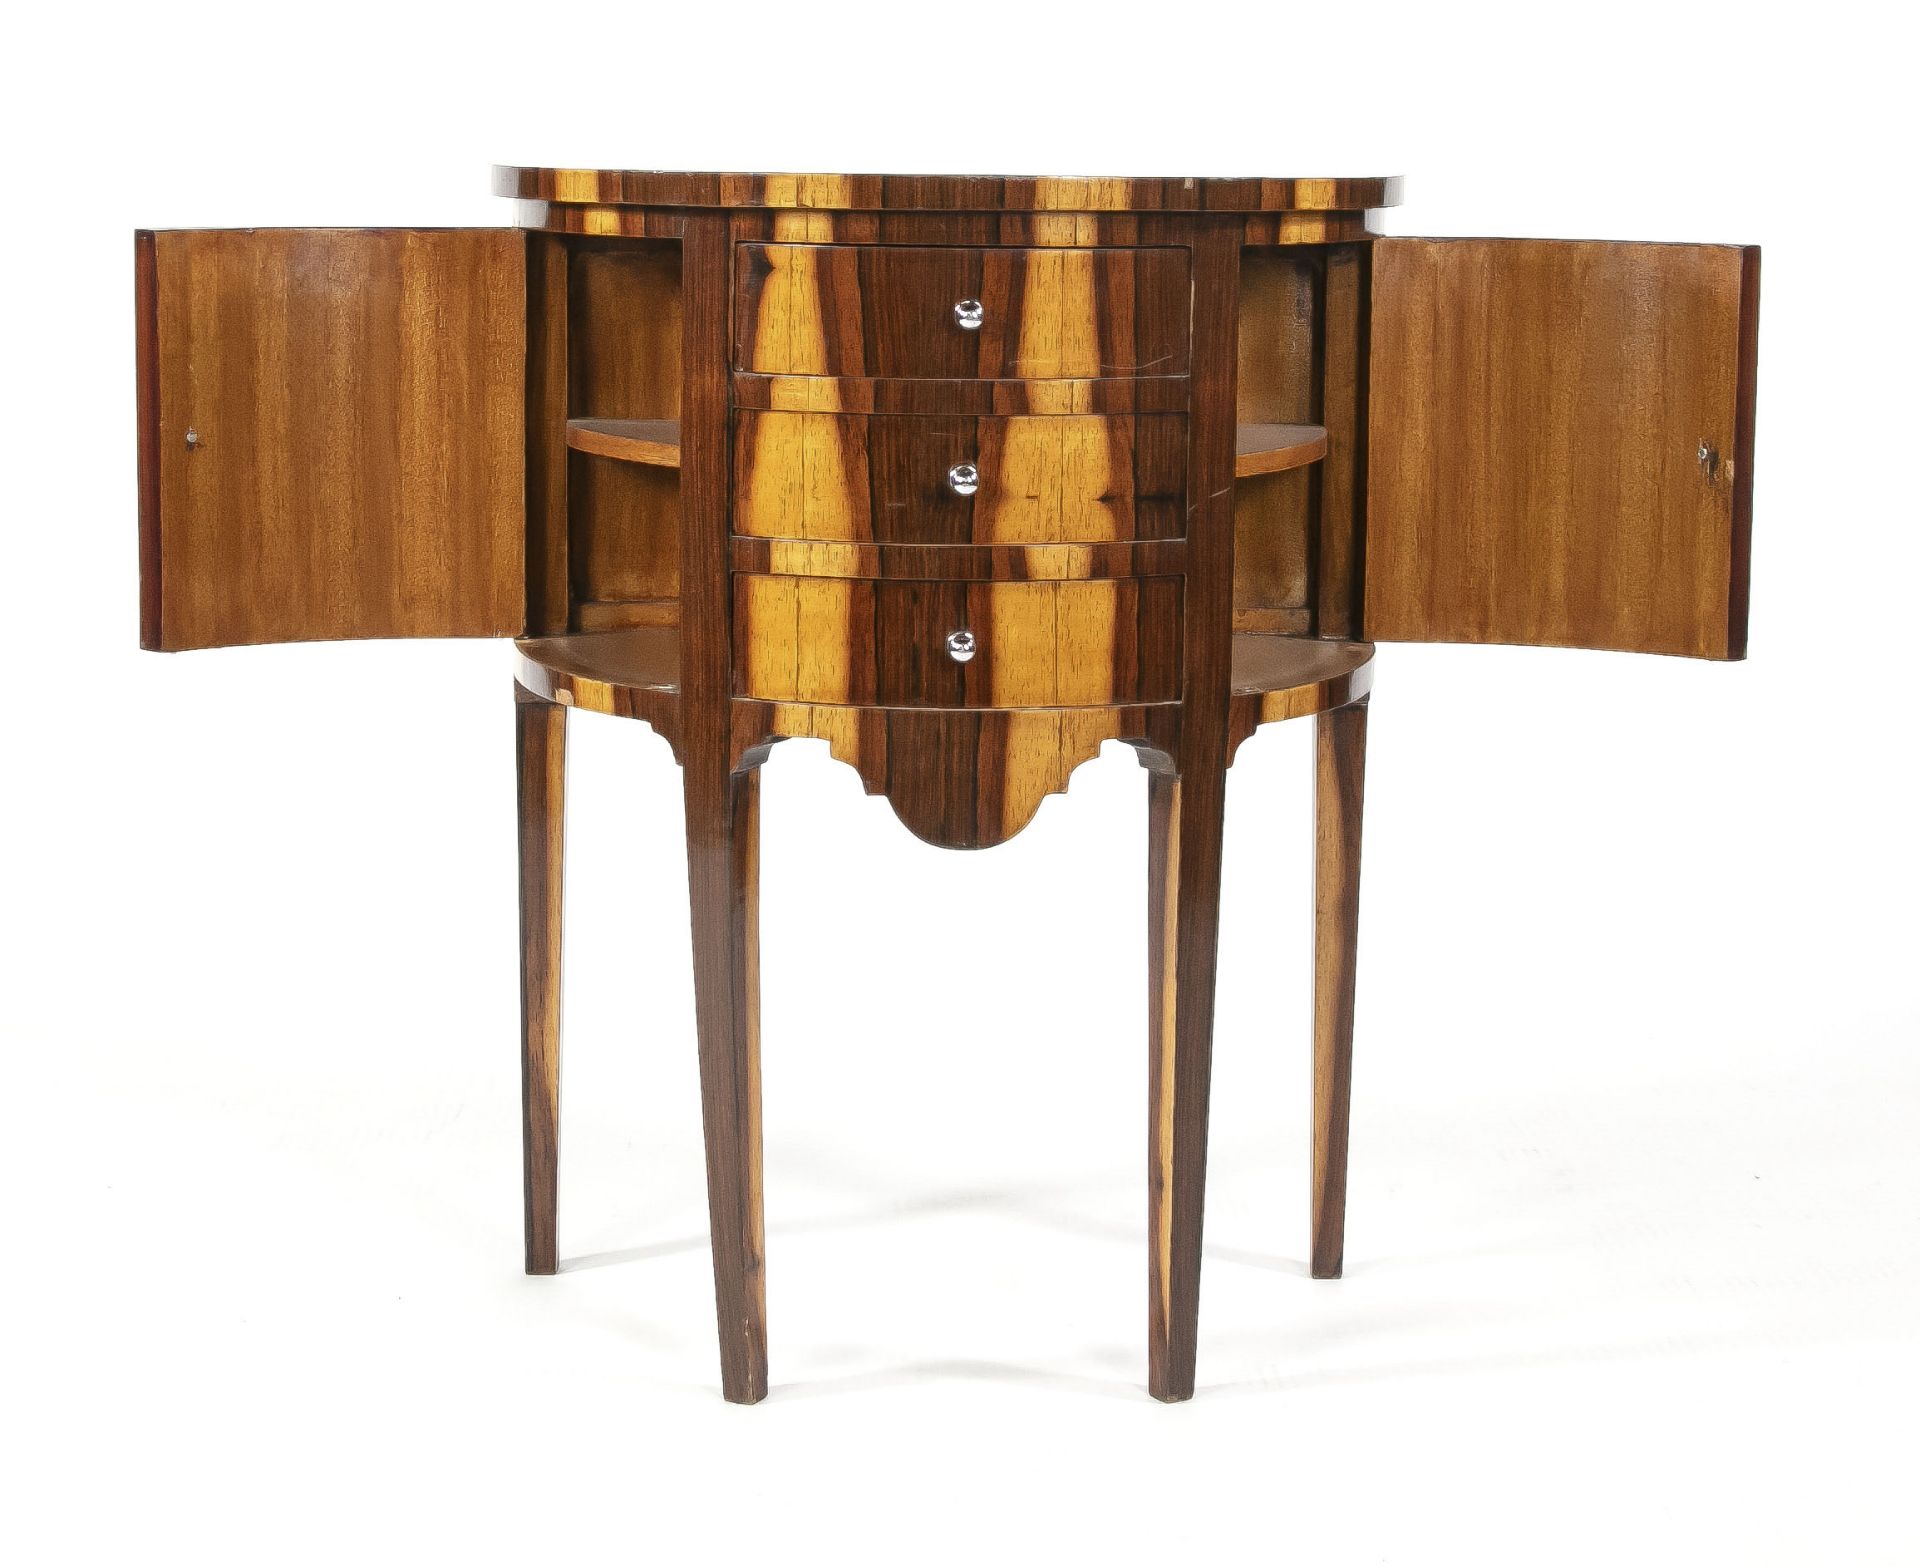 Demi-Lune half-moon chest of drawers in Empire style, late 20th century, Indian 2-tone rosewood - Image 2 of 2